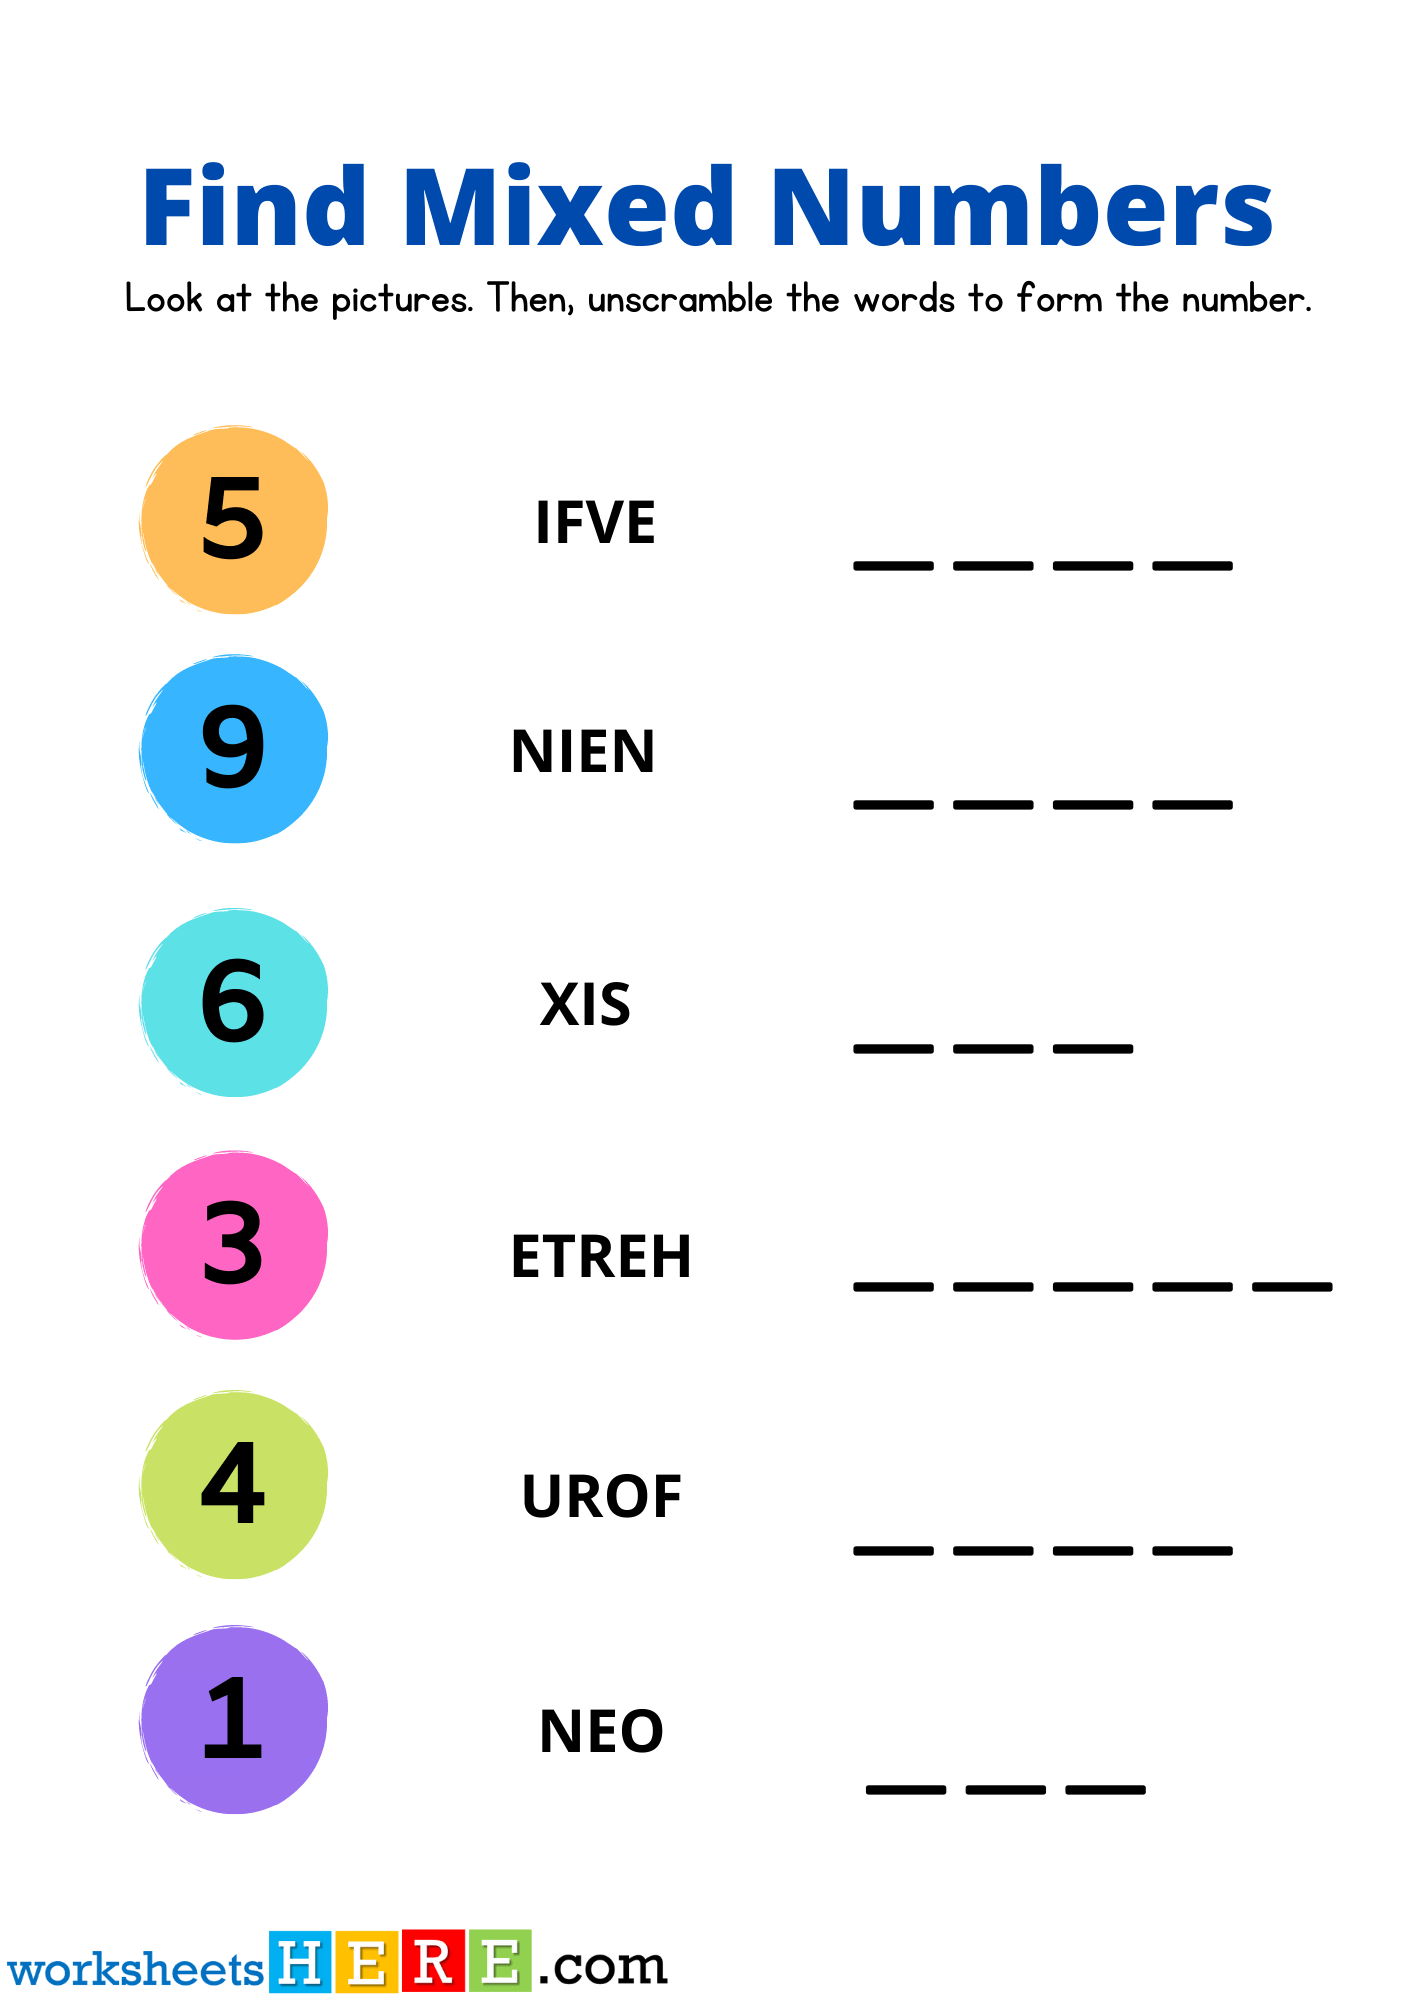 Find Mixed Numbers, Numbers Scrambles PDF Worksheet For Kids